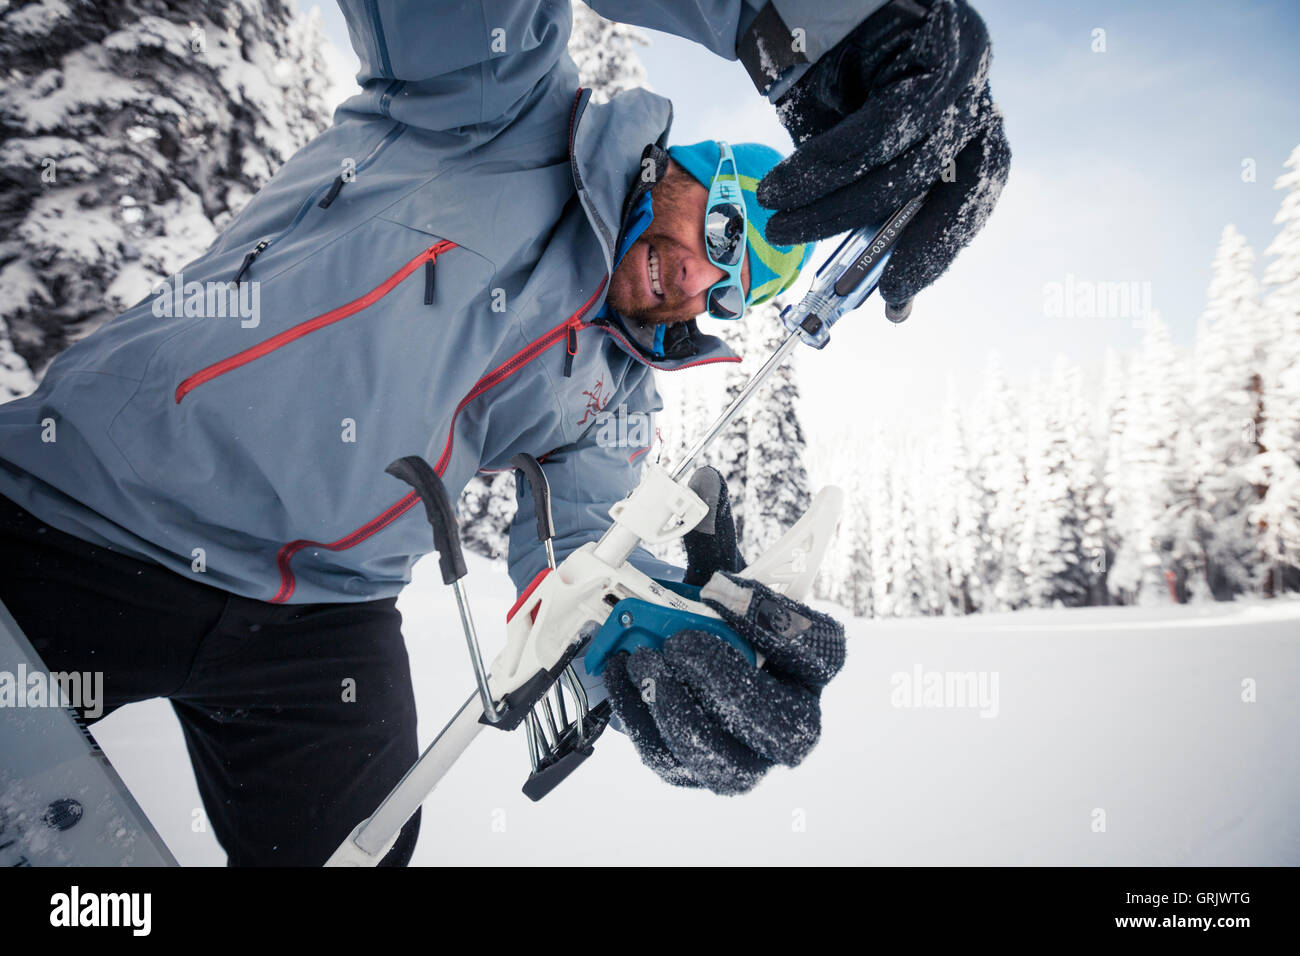 A backcountry skier uses a screw driver to set the DIN setting on his binding. Stock Photo